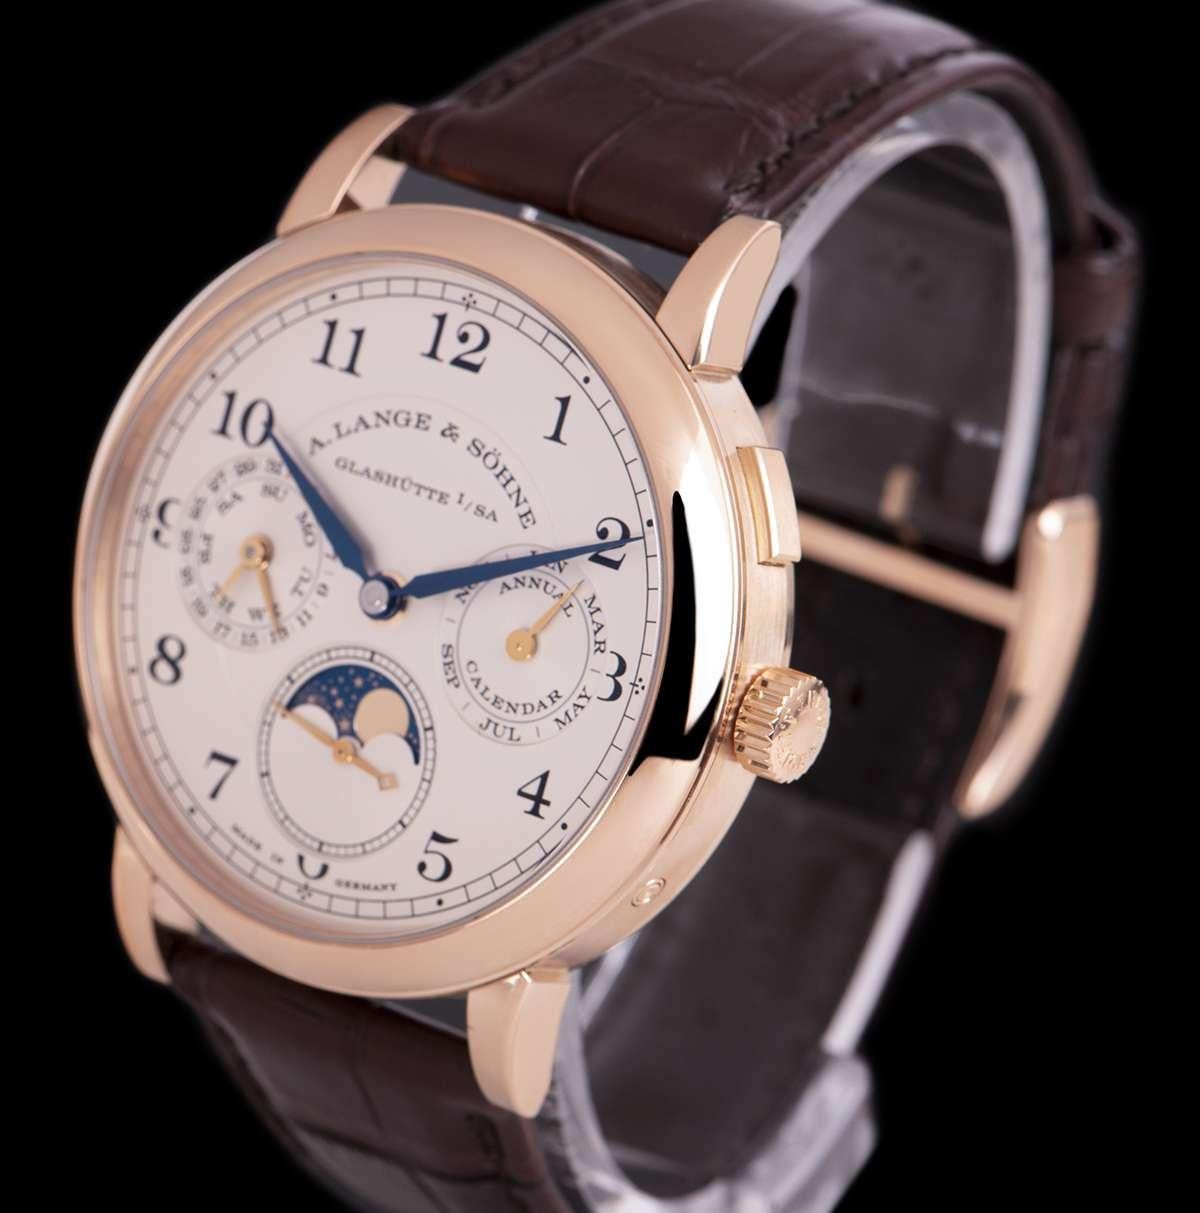 A 40mm 18k Rose Gold 1815 Annual Calendar Gents Wristwatch, silver dial with arabic numbers, month sub-dial at 3 0'clock, moonphase display and small seconds at 6 0'clock, date and weekday sub-dial at 9 0'clock, a fixed 18k rose gold bezel, an